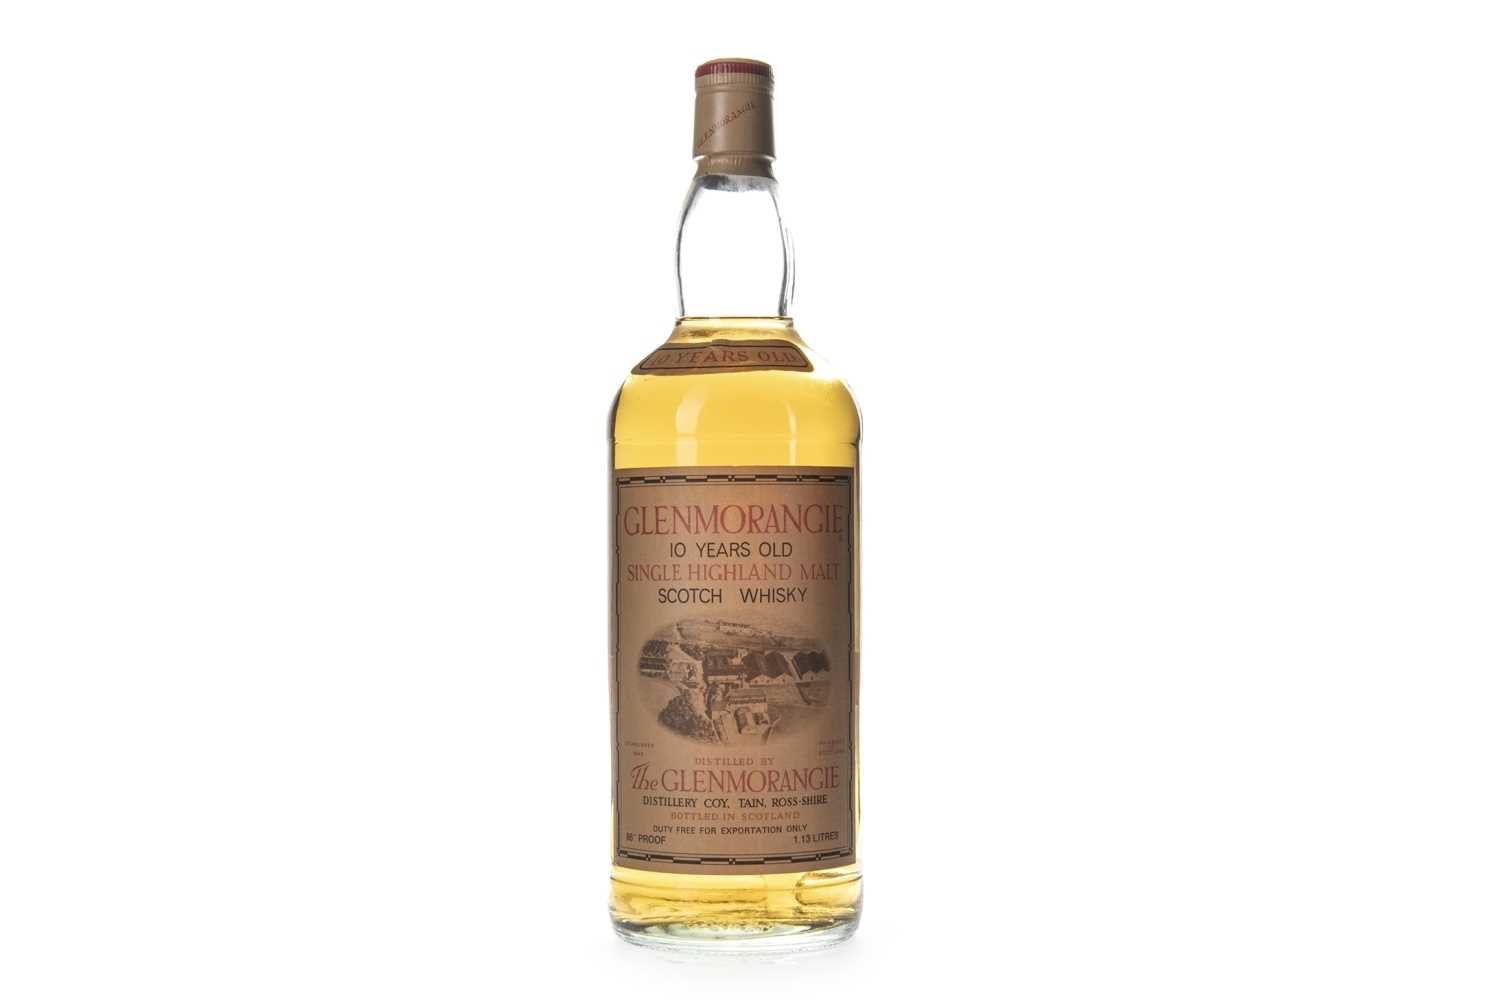 Lot 324 - GLENMORANGIE 10 YEARS OLD - 1.13 LITRES